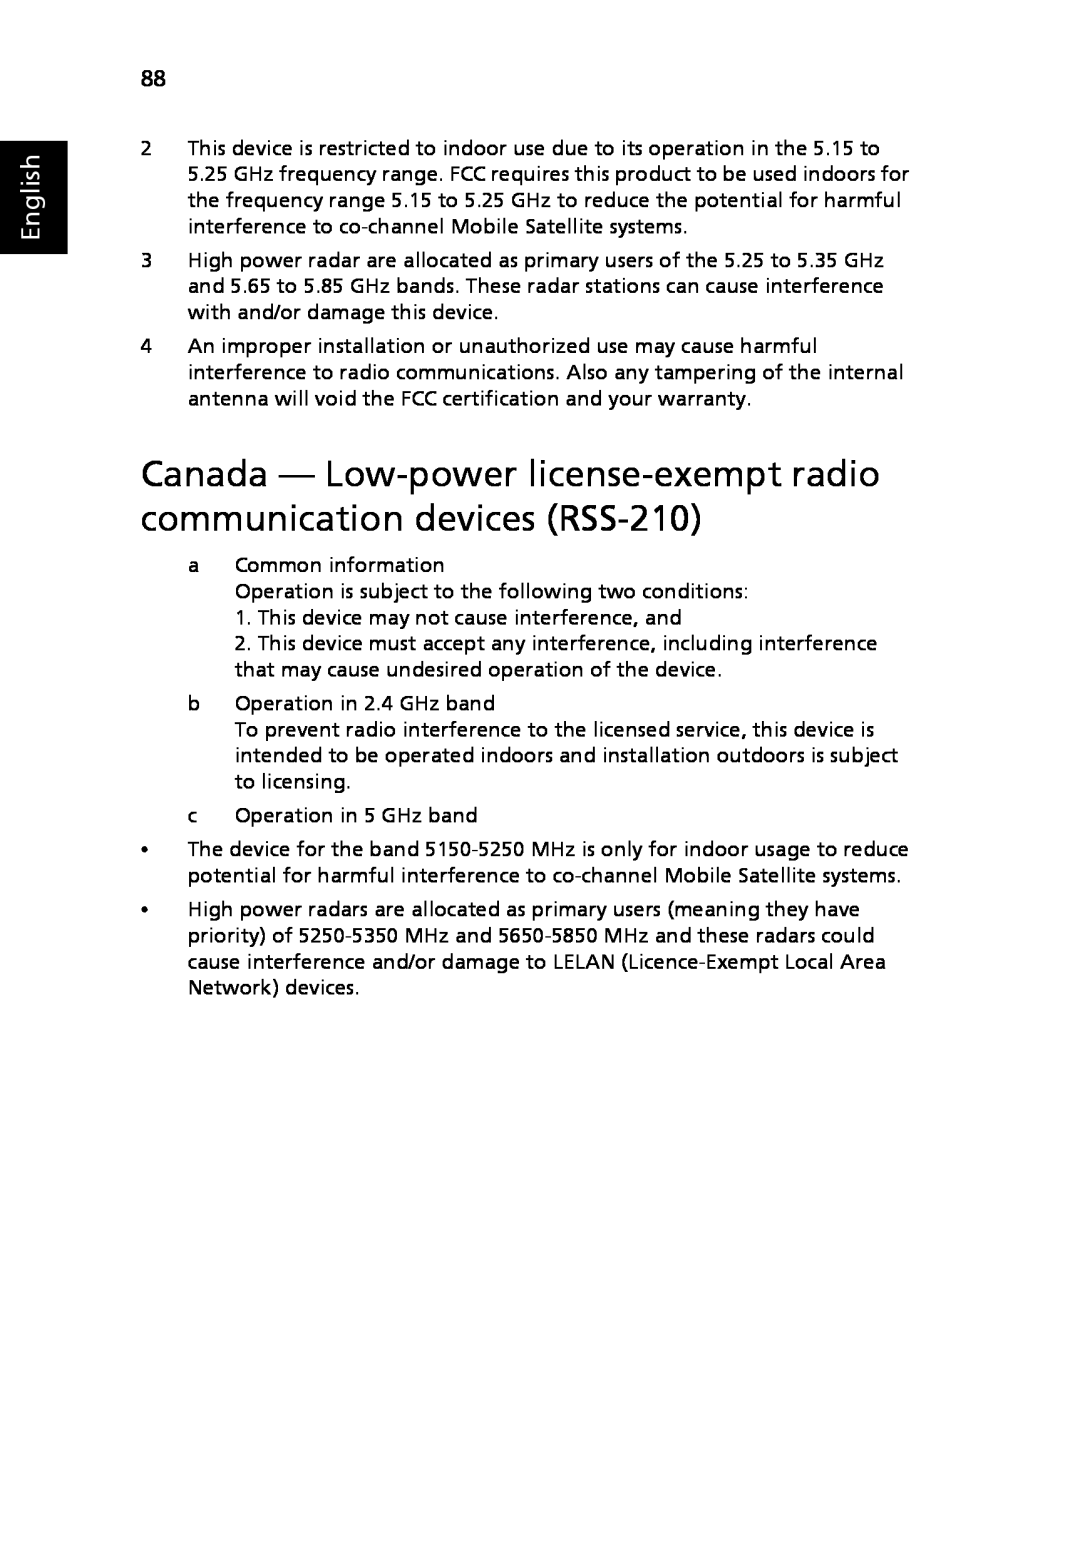 Acer 5410 Series, 5010 Series manual Canada - Low-power license-exempt radio communication devices RSS-210, English 